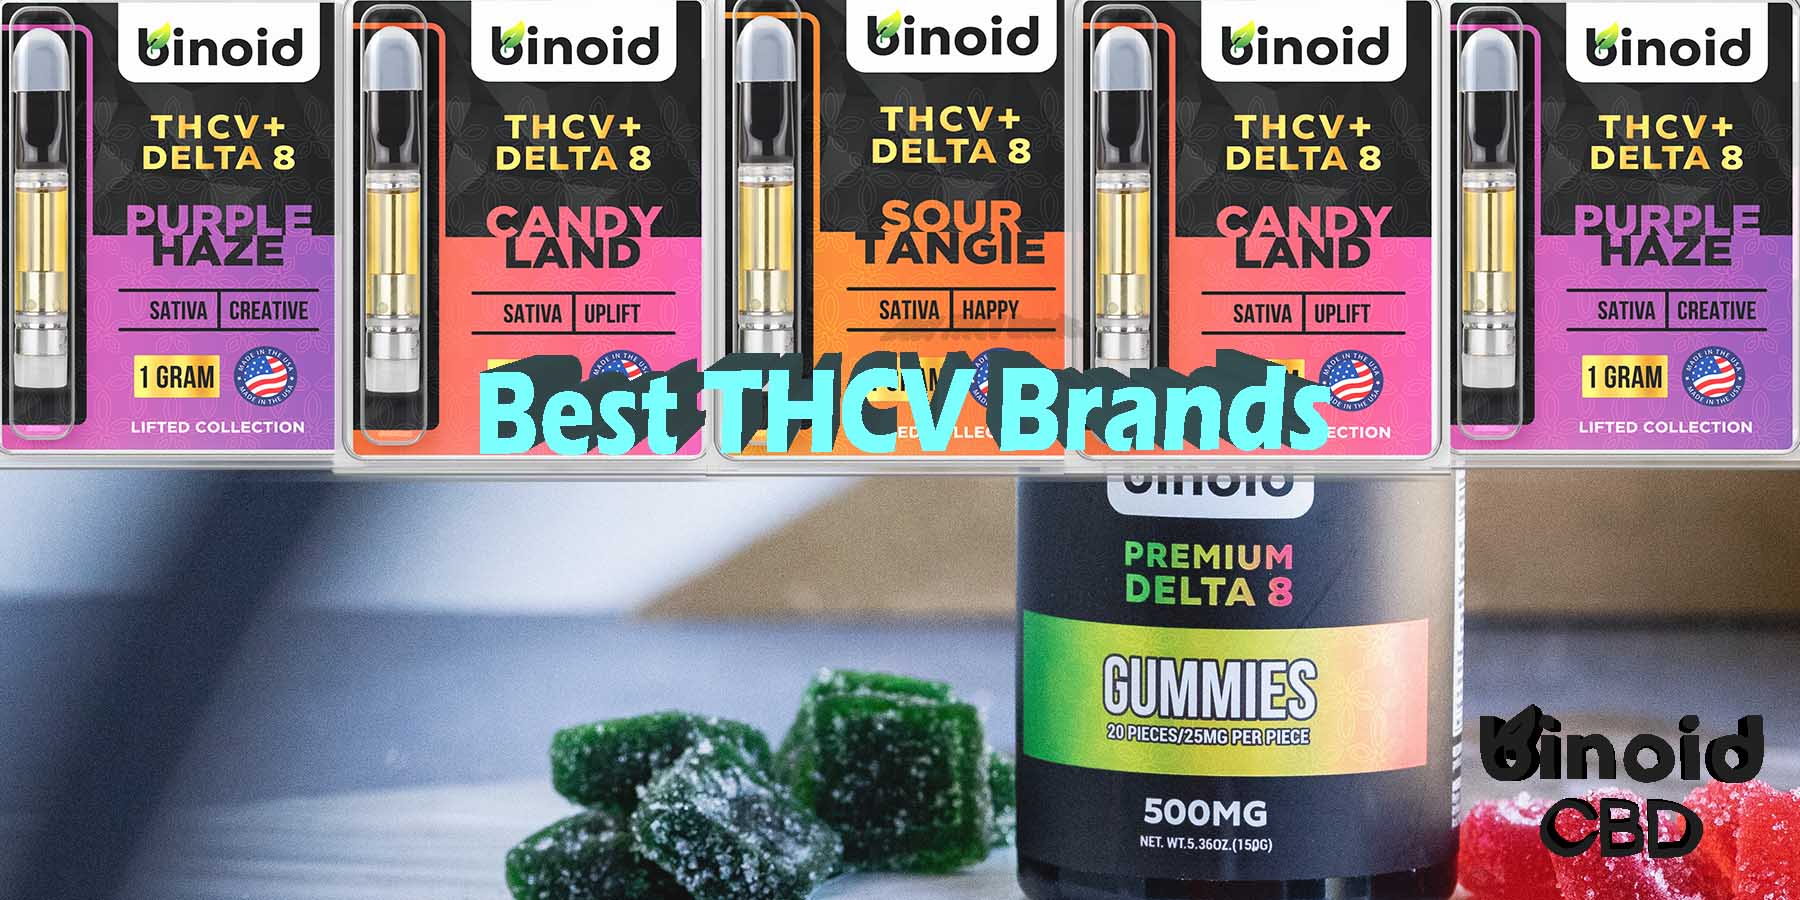 Best THCV Brands Review Take Work Online Best Brand Price Get Near Me Lowest Coupon Discount Store Shop Vapes Carts Online Strongest Smoke Shop Binoid